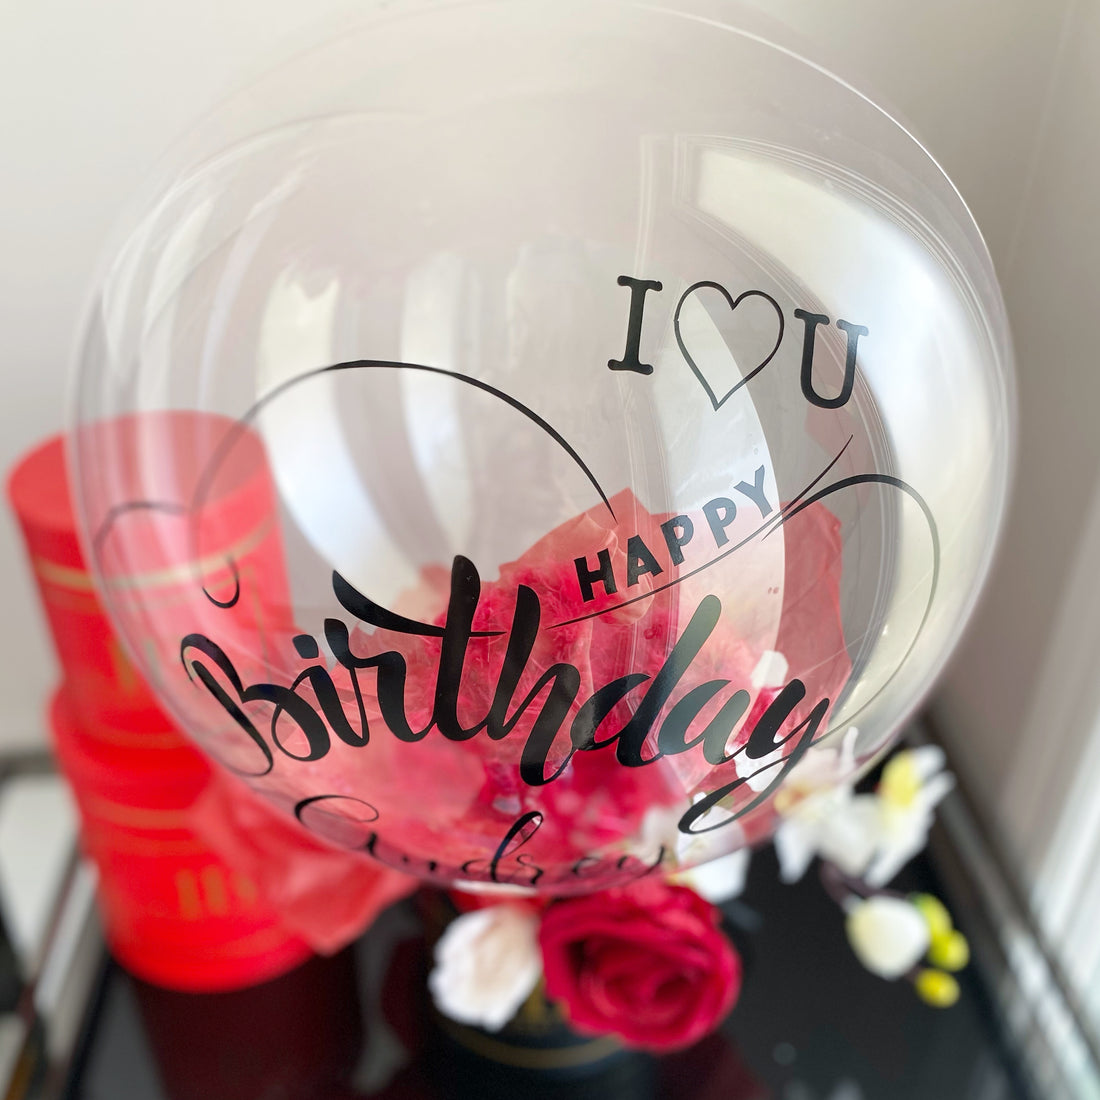 Personalized Balloon and Faux Blooms